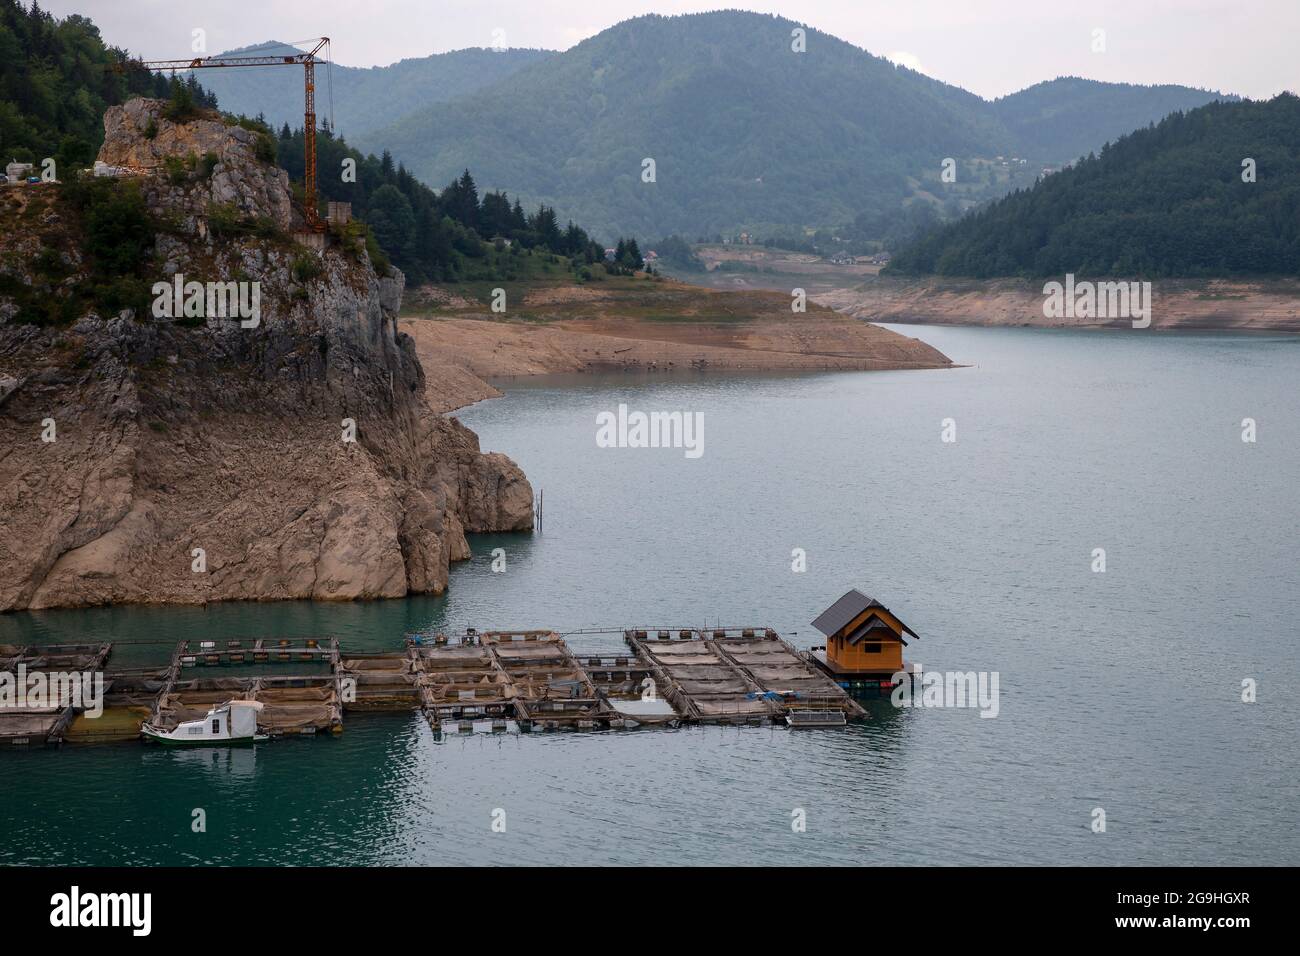 Serbia - Floating cages of trout farm on the Tara Mountain at Lake Zaovine Stock Photo